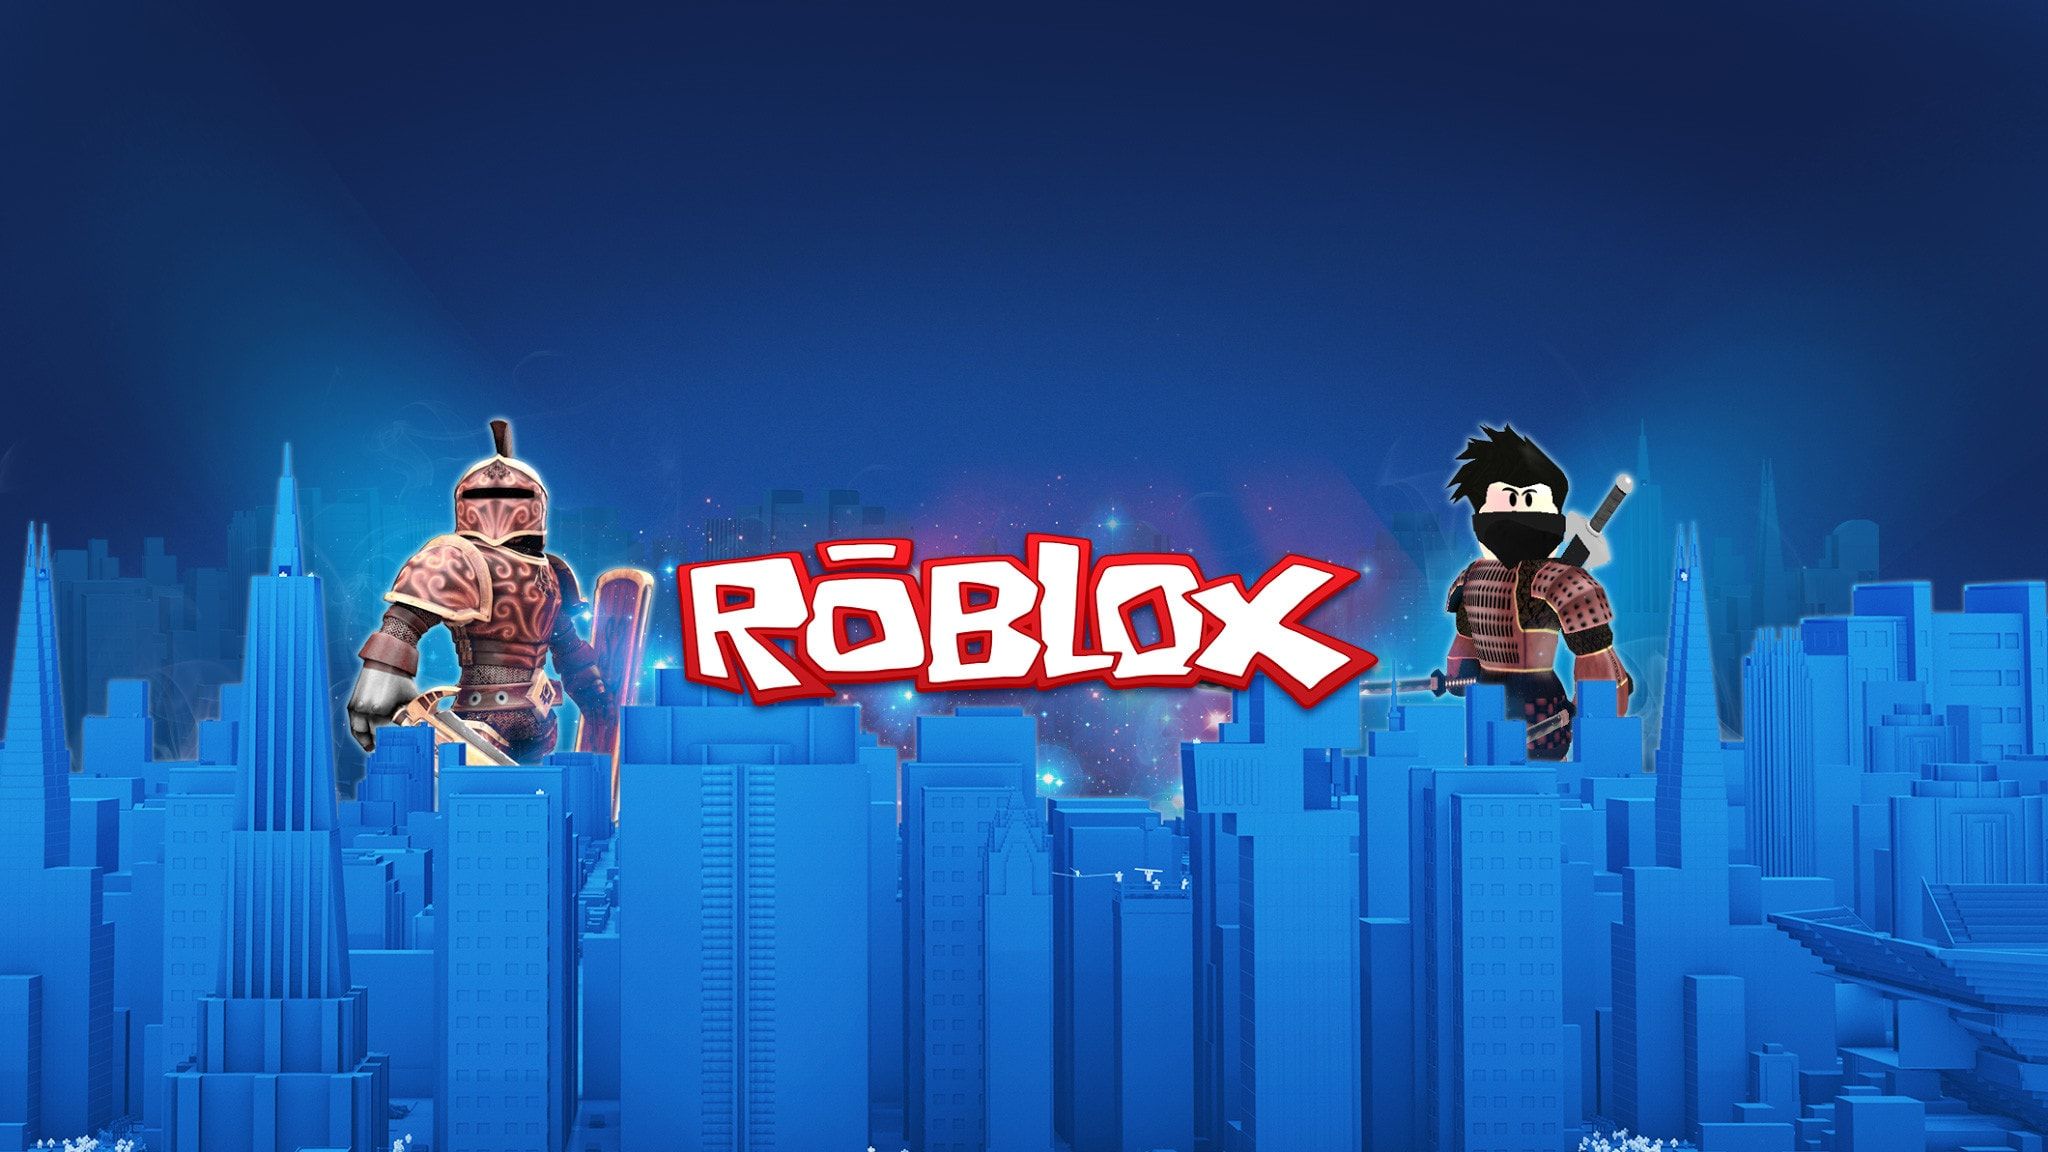 Roblox Aesthetic Character Wallpapers - Wallpaper Cave